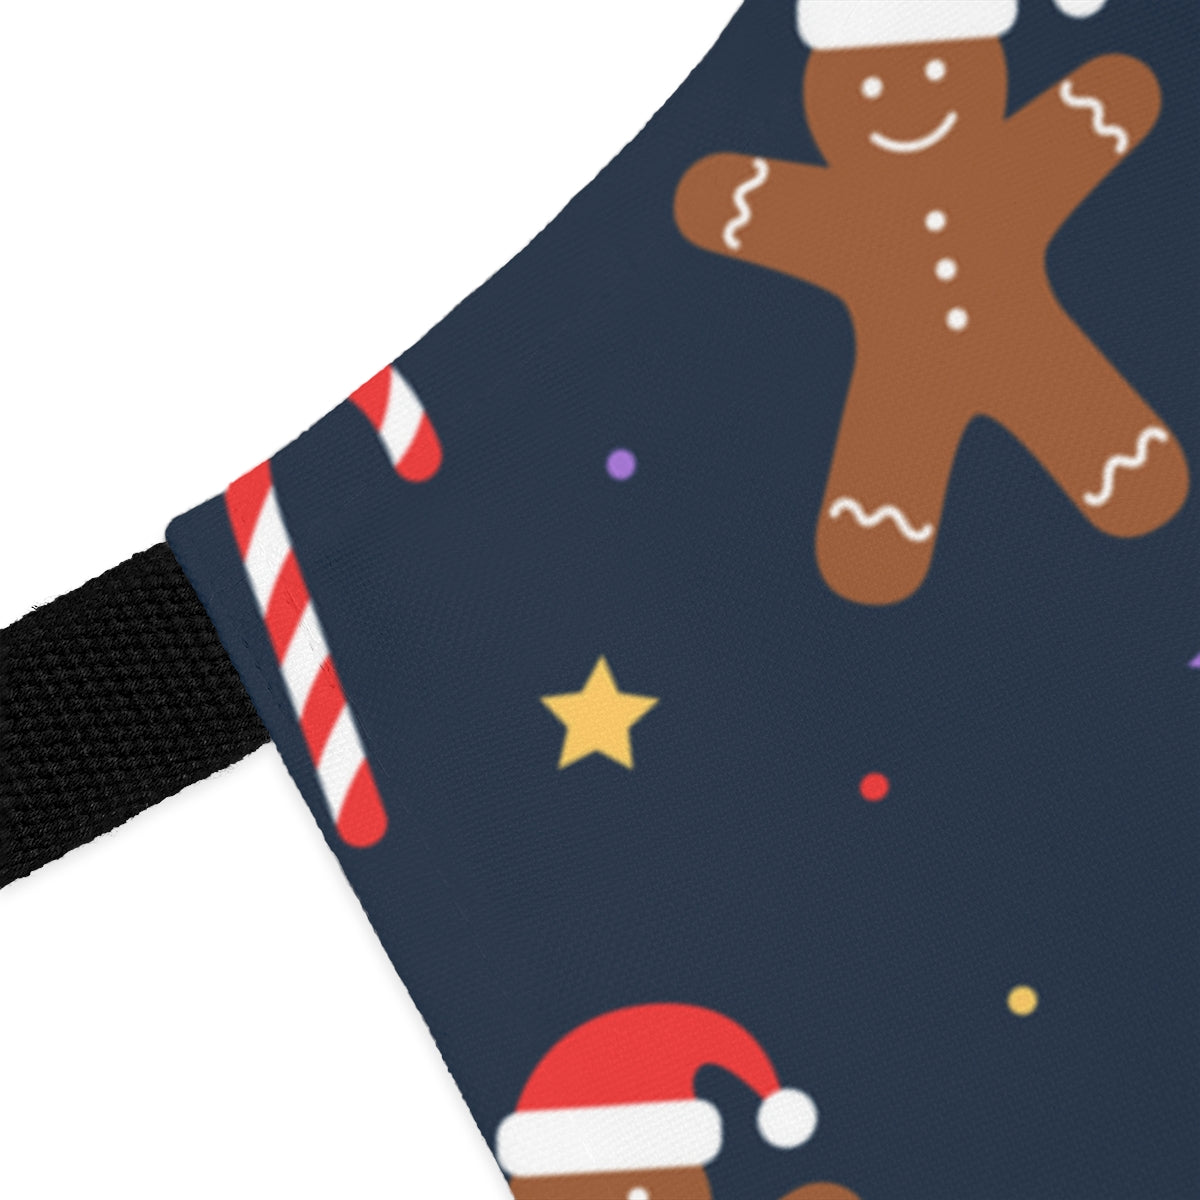 Gingerbread and Candy Canes Apron